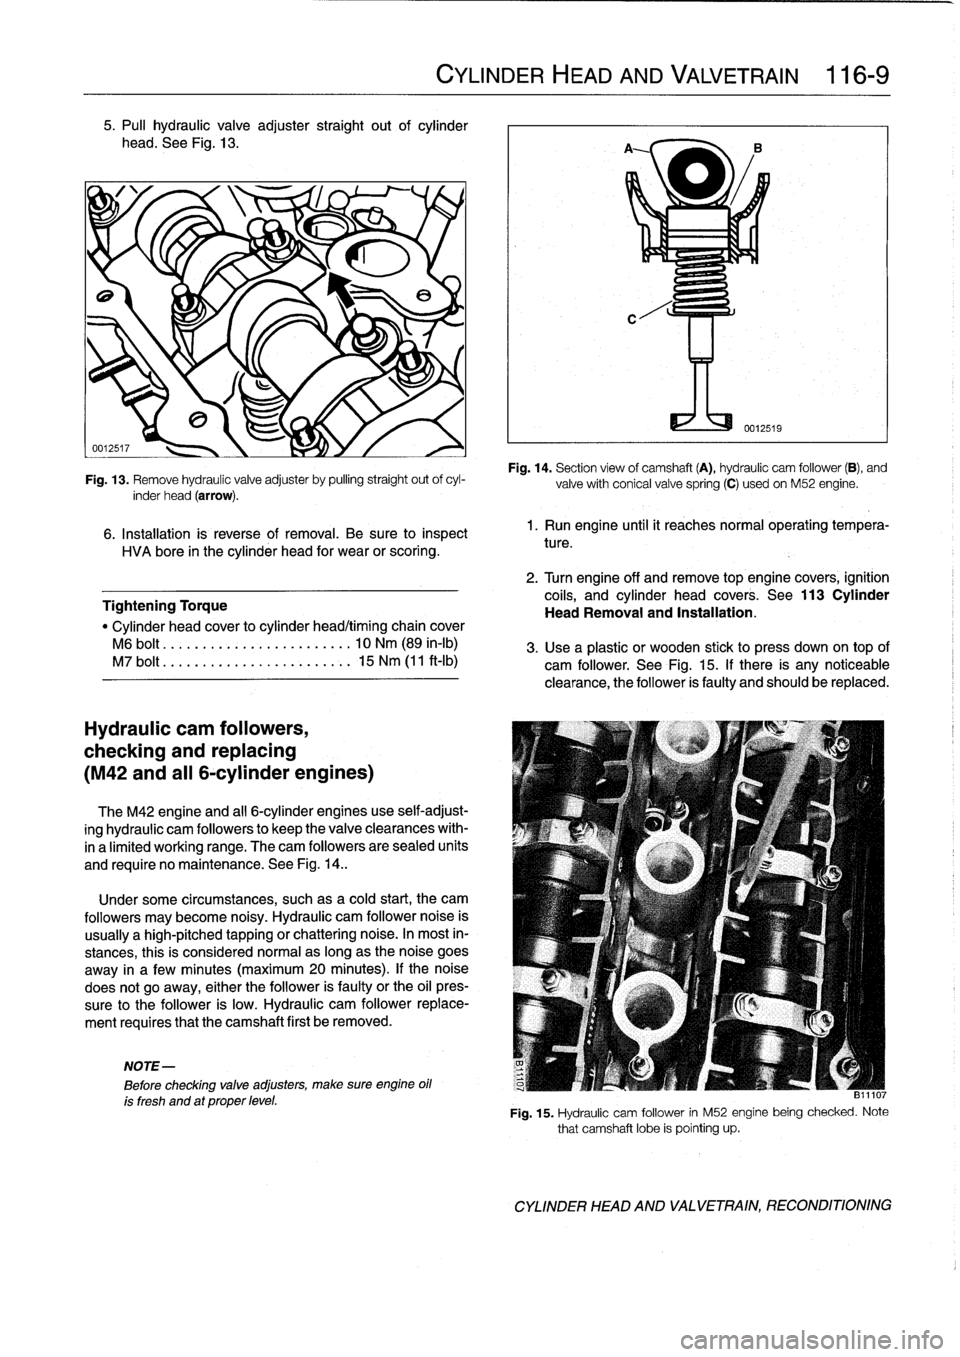 BMW 328i 1993 E36 Owners Manual 5
.
Pull
hydraulic
valve
adjuster
straight
out
of
cylinder

head
.
See
Fig
.
13
.

Fig
.
13
.
Remove
hydraulic
valve
adjuster
by
pulling
straight
out
ofcyl-
inder
head
(arrow)
.

6
.
Installation
is
r